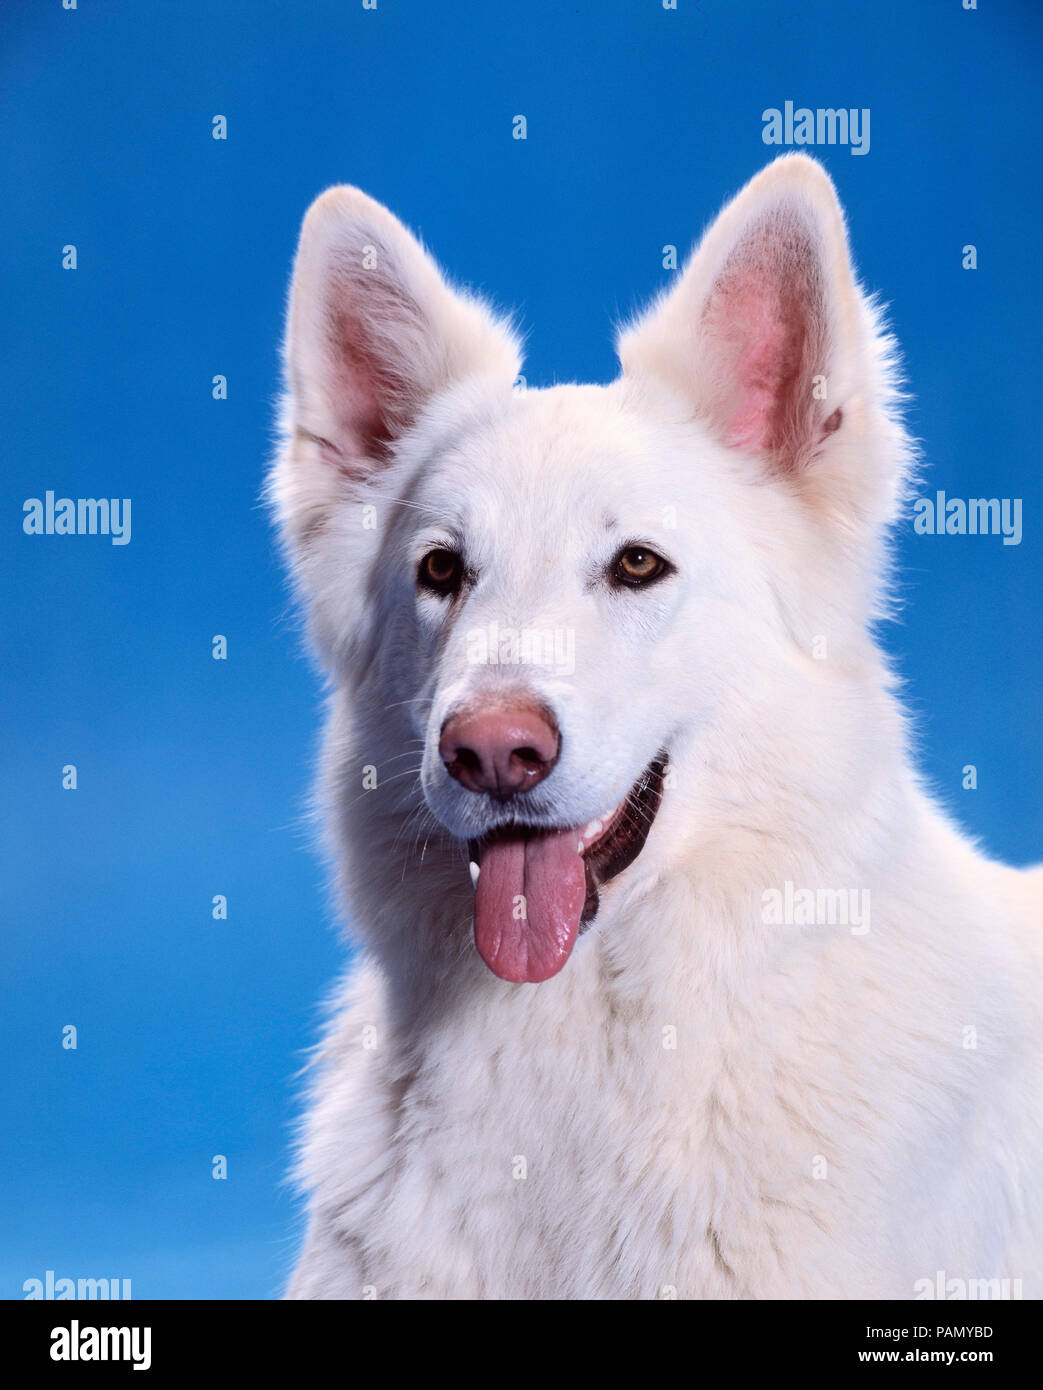 Berger Blanc Suisse, White Swiss Shepherd Dog. Portrait of adult. Studio picture against a blue background. Germany Stock Photo